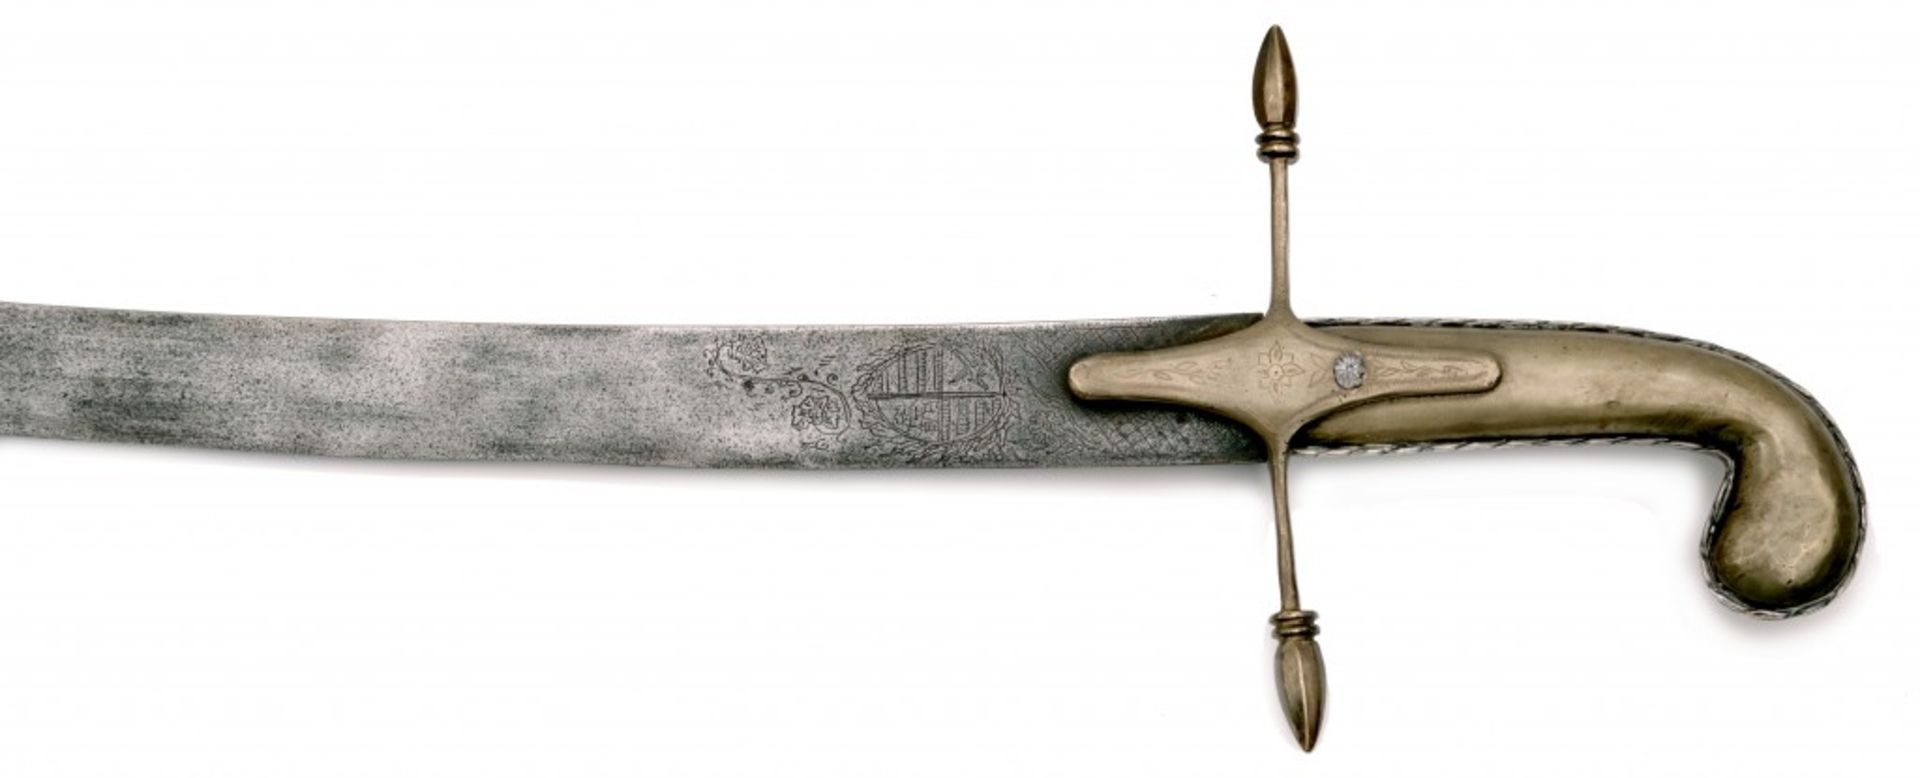 A Sabre for an Hungarian Magnate - Image 2 of 3